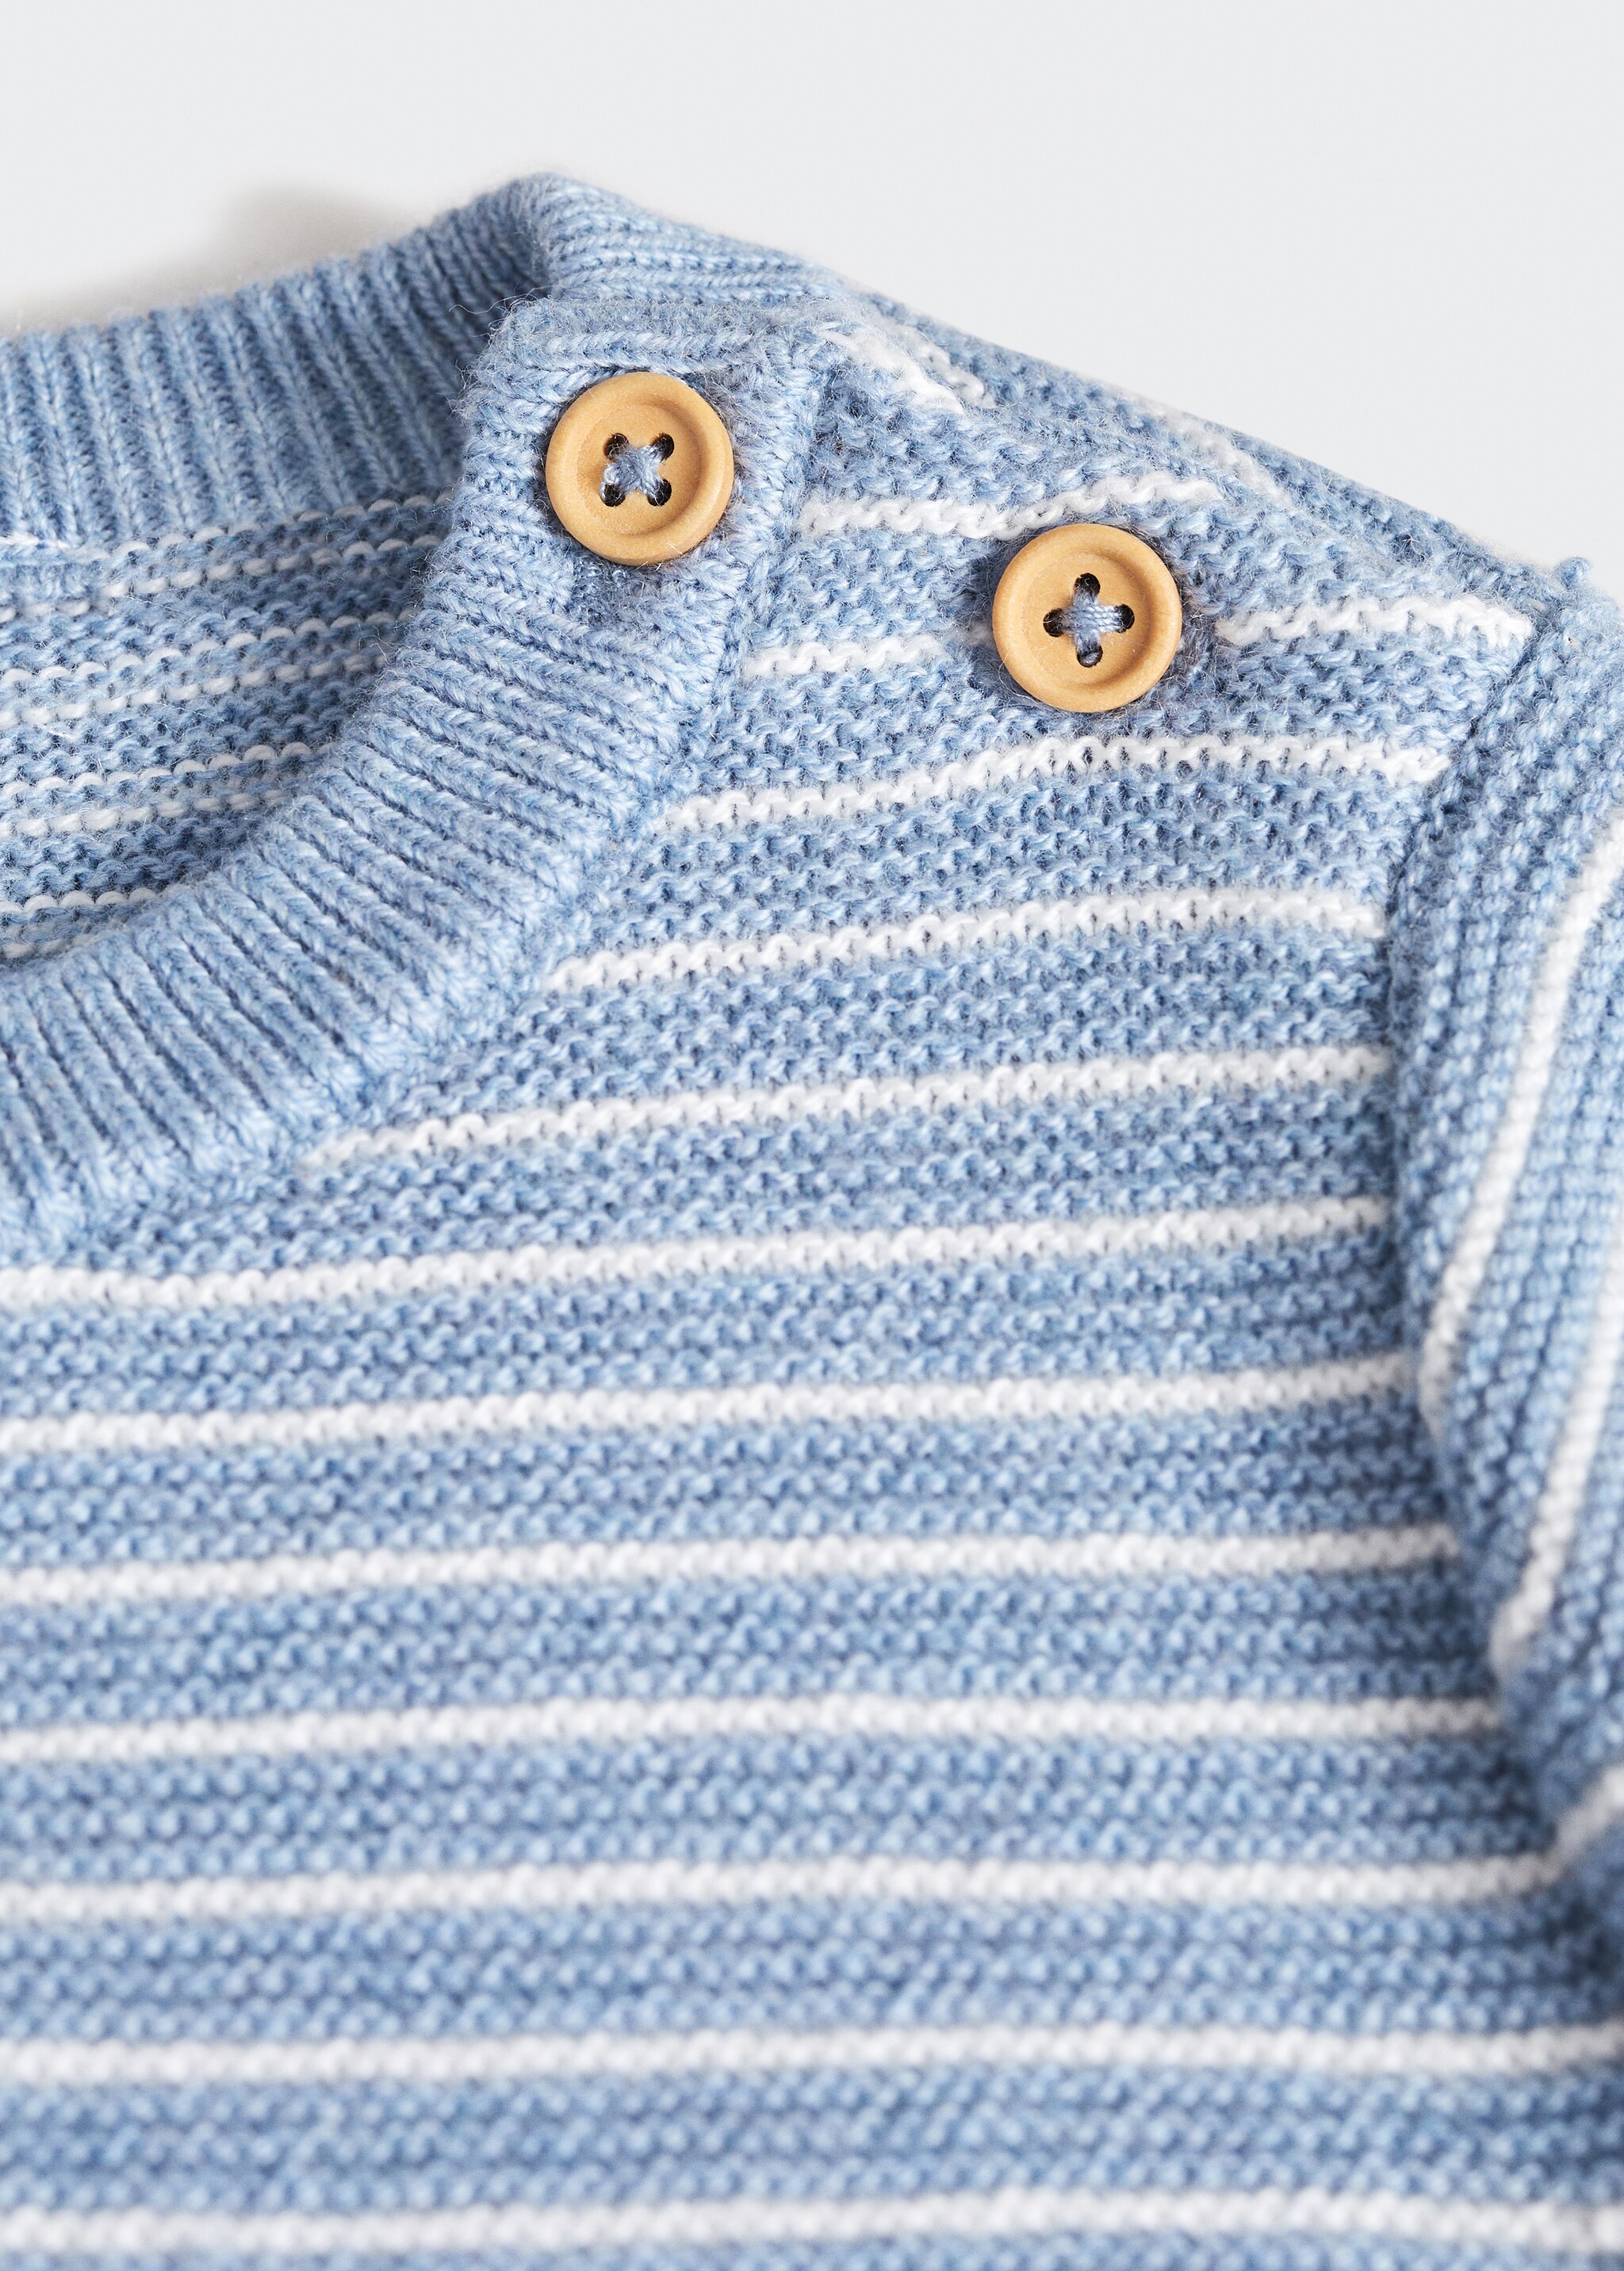 Strip printed sweater - Details of the article 8